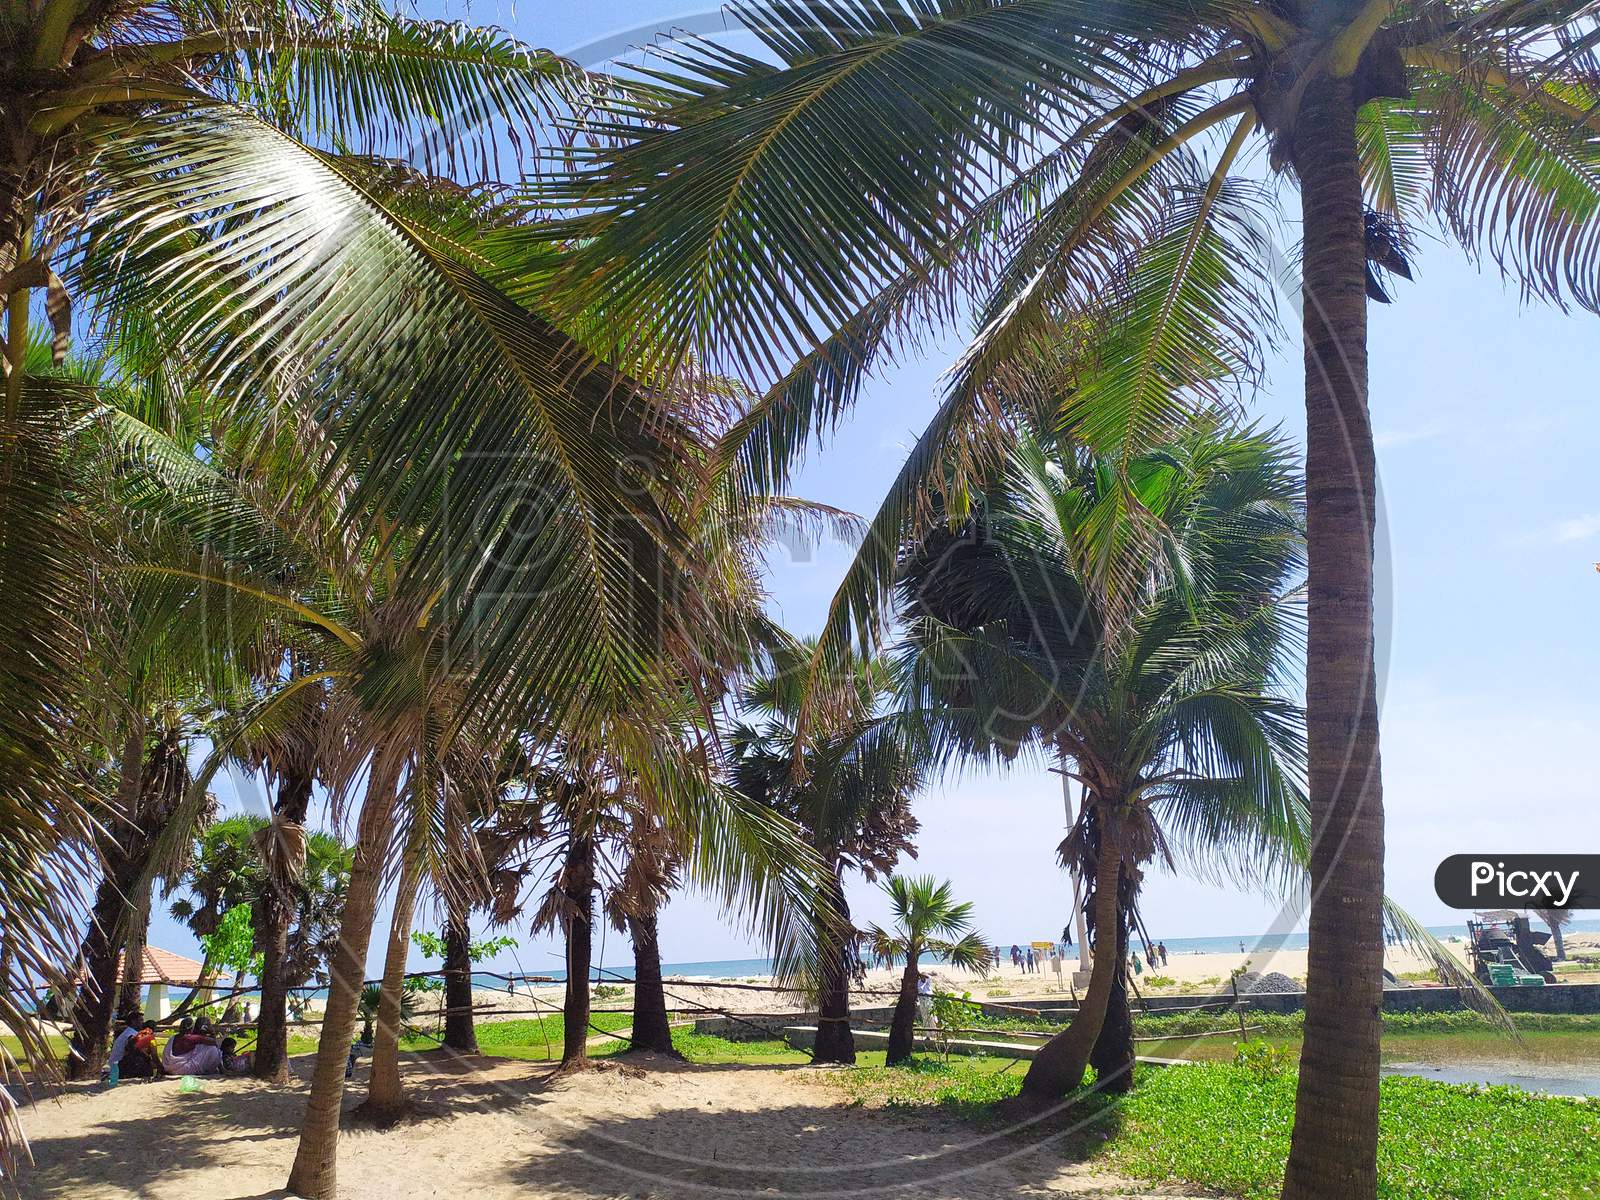 Coconut Trees at a Beach